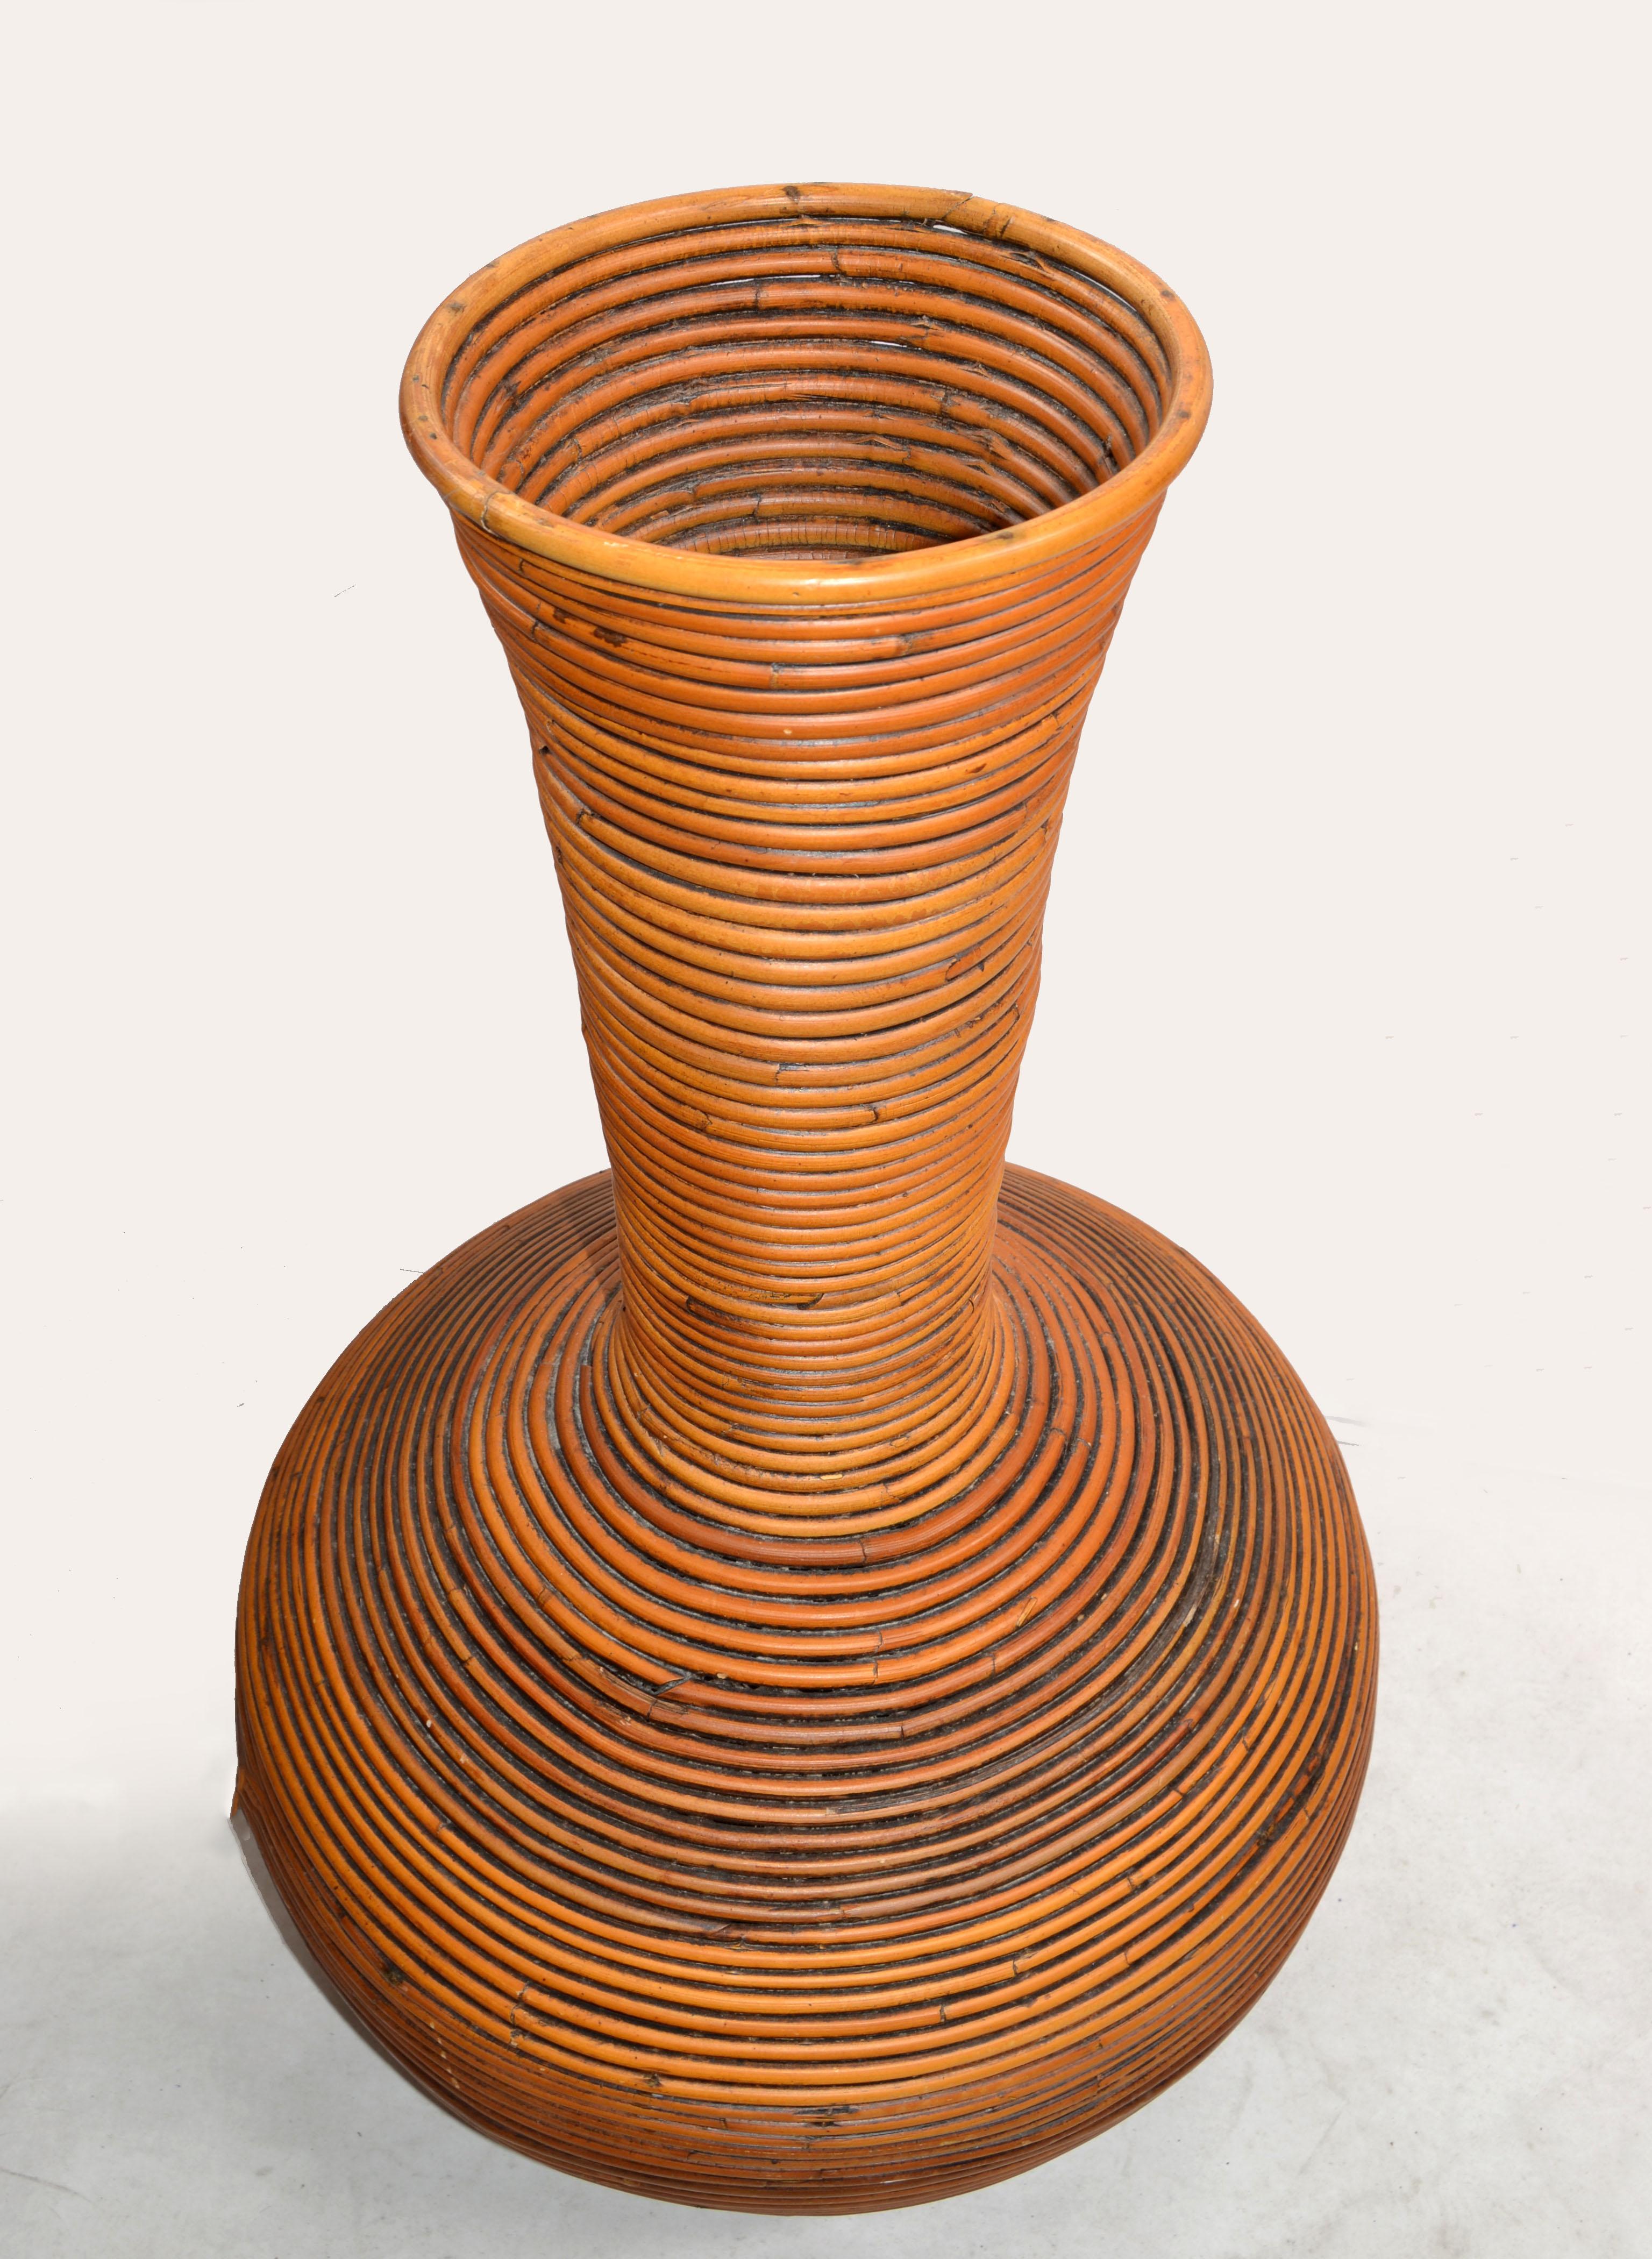 70s Tall Bohemian Brown Reed Cane Bamboo Handcrafted Tall Cone Shape Floor Vase  For Sale 2